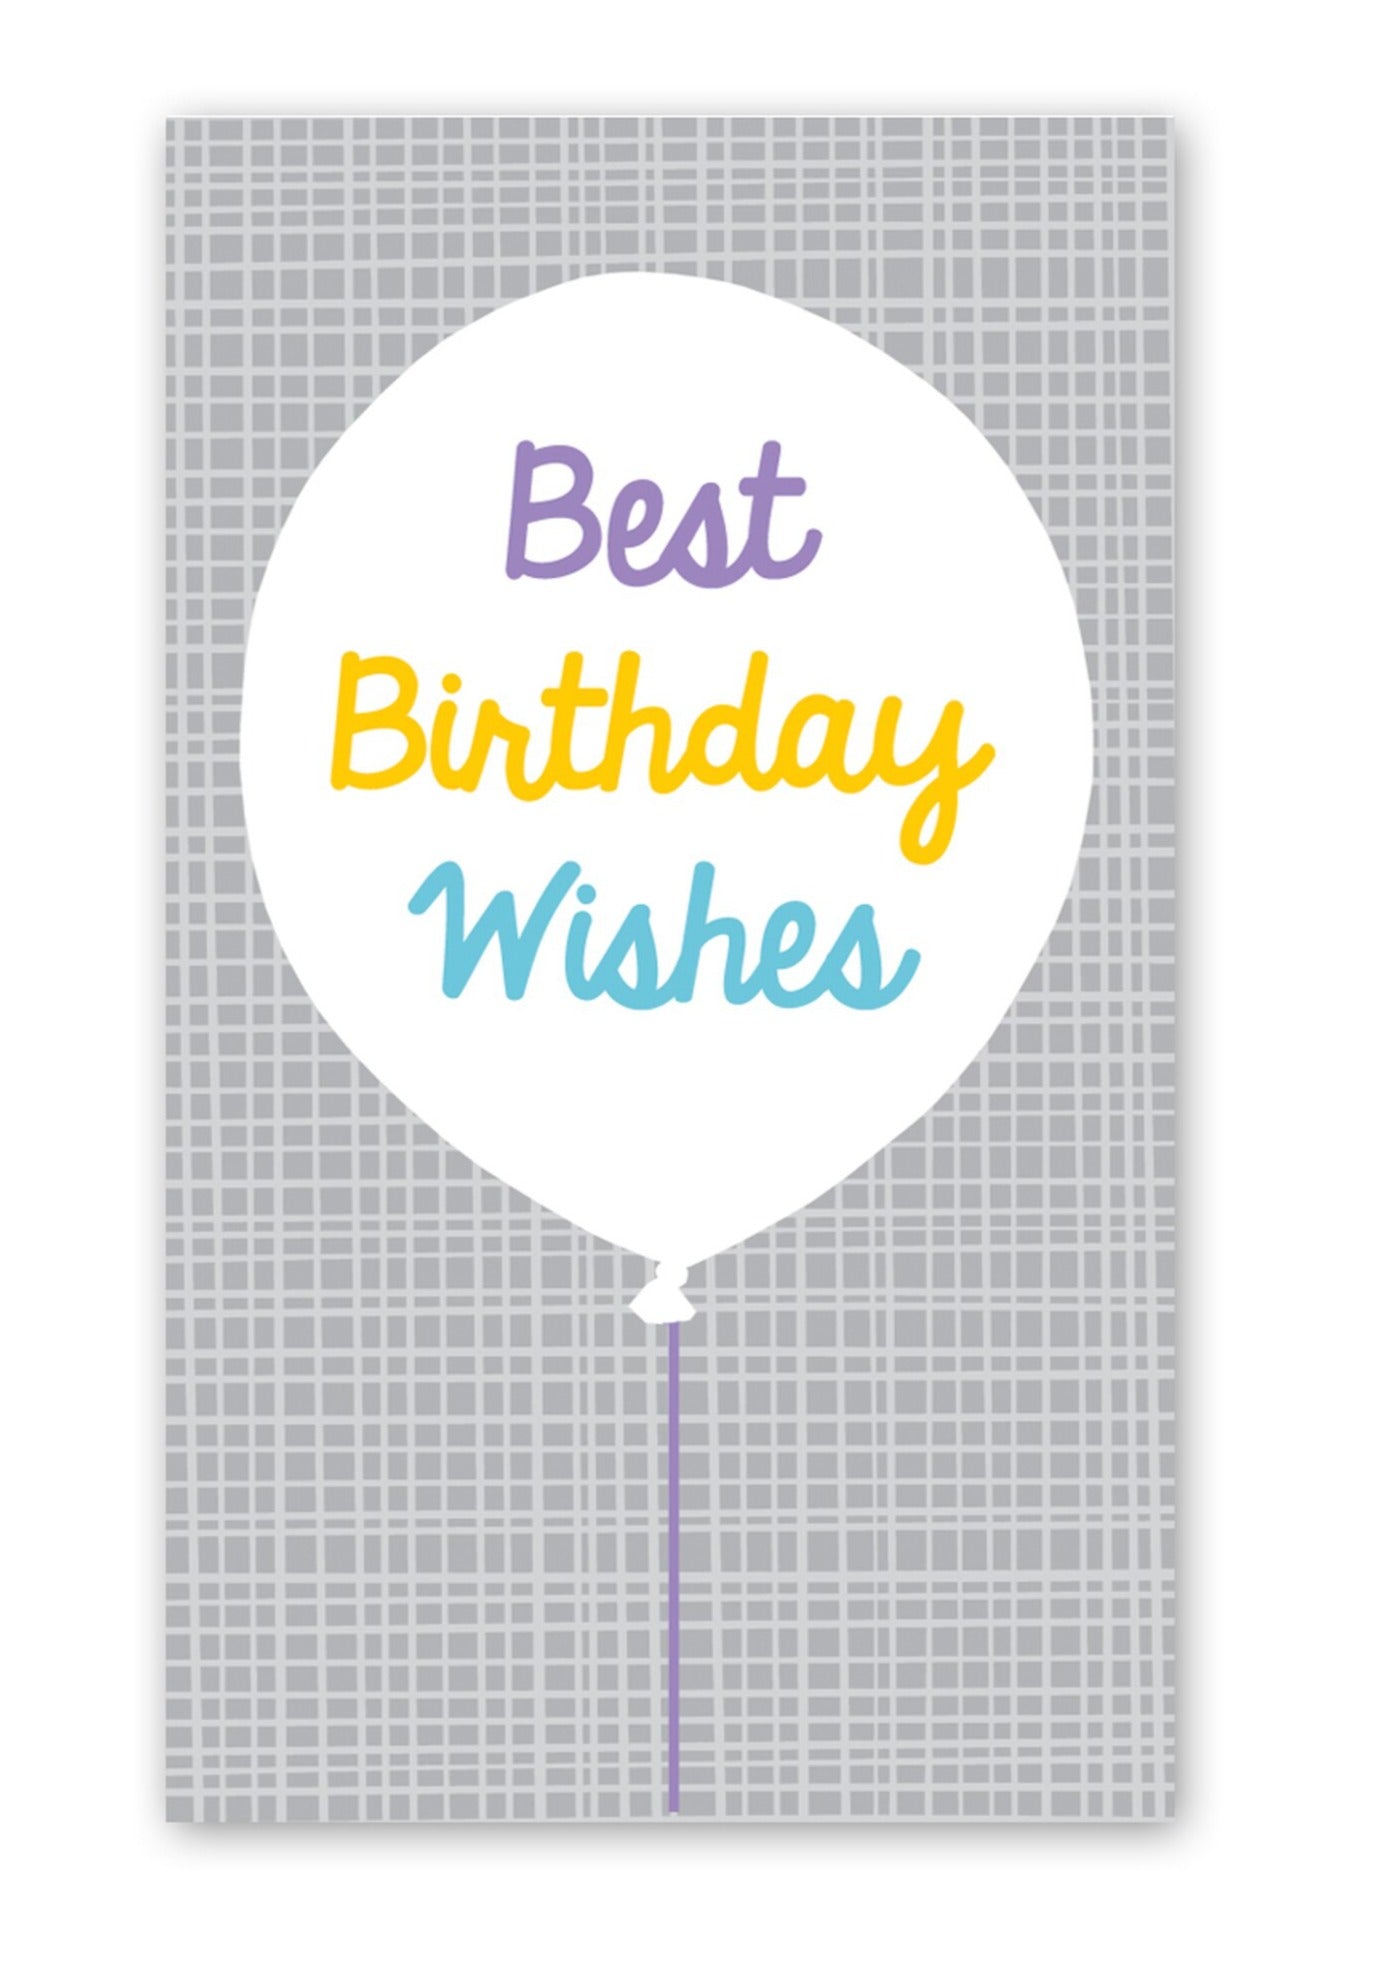 Mini Made Greeting Cards - FINAL SALE Home & Lifestyle Birthday Wishes Balloon Card